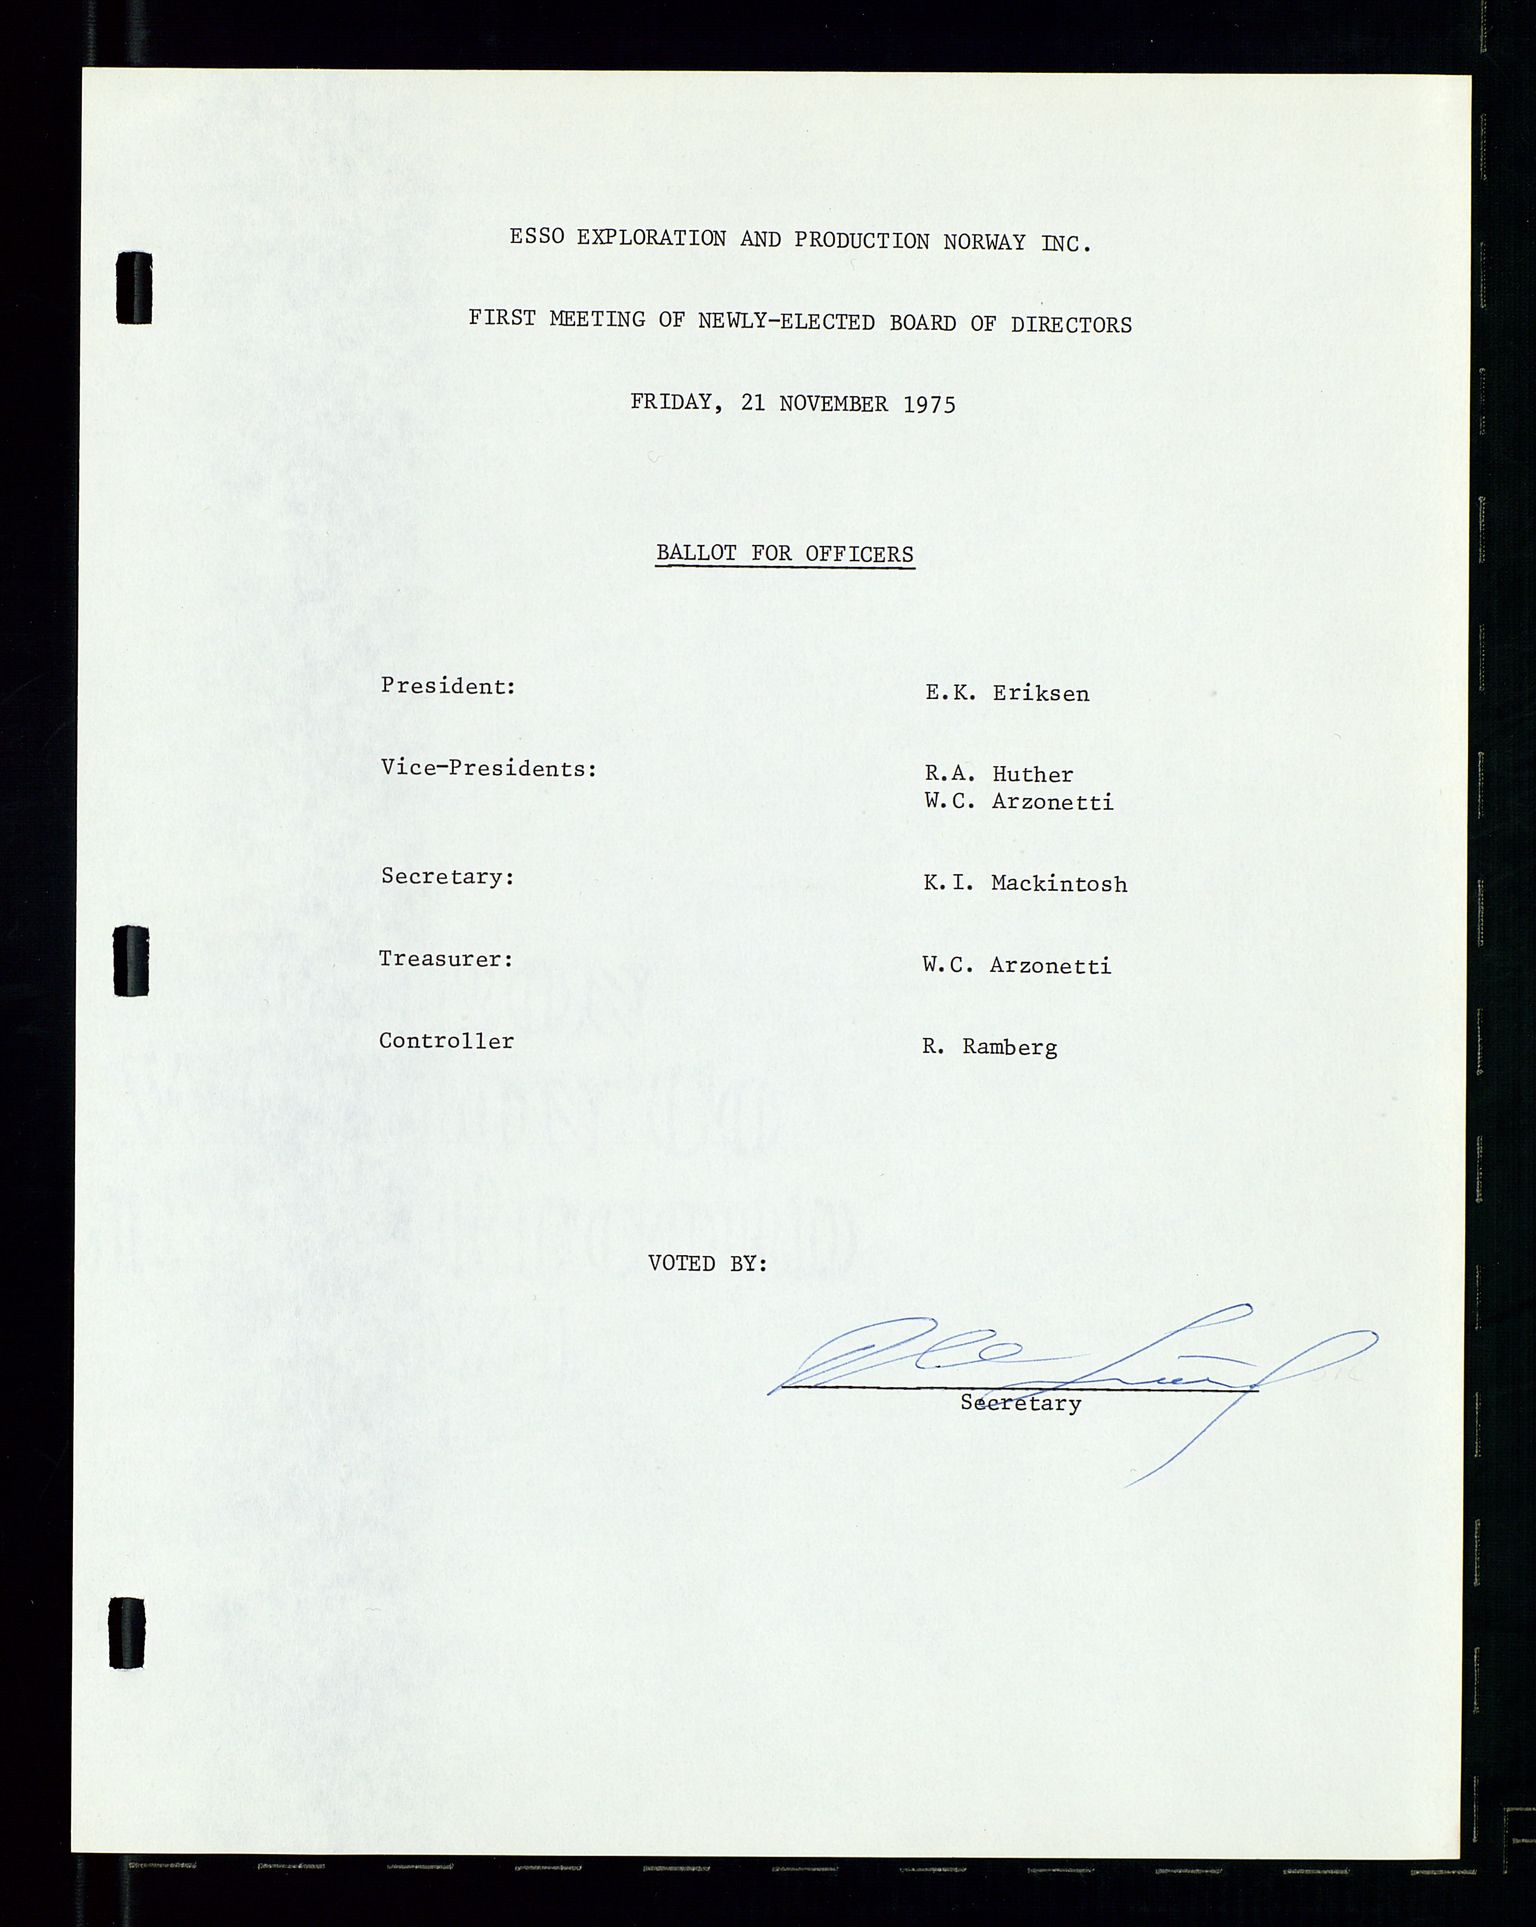 Pa 1512 - Esso Exploration and Production Norway Inc., SAST/A-101917/A/Aa/L0001/0002: Styredokumenter / Corporate records, Board meeting minutes, Agreements, Stocholder meetings, 1975-1979, p. 22